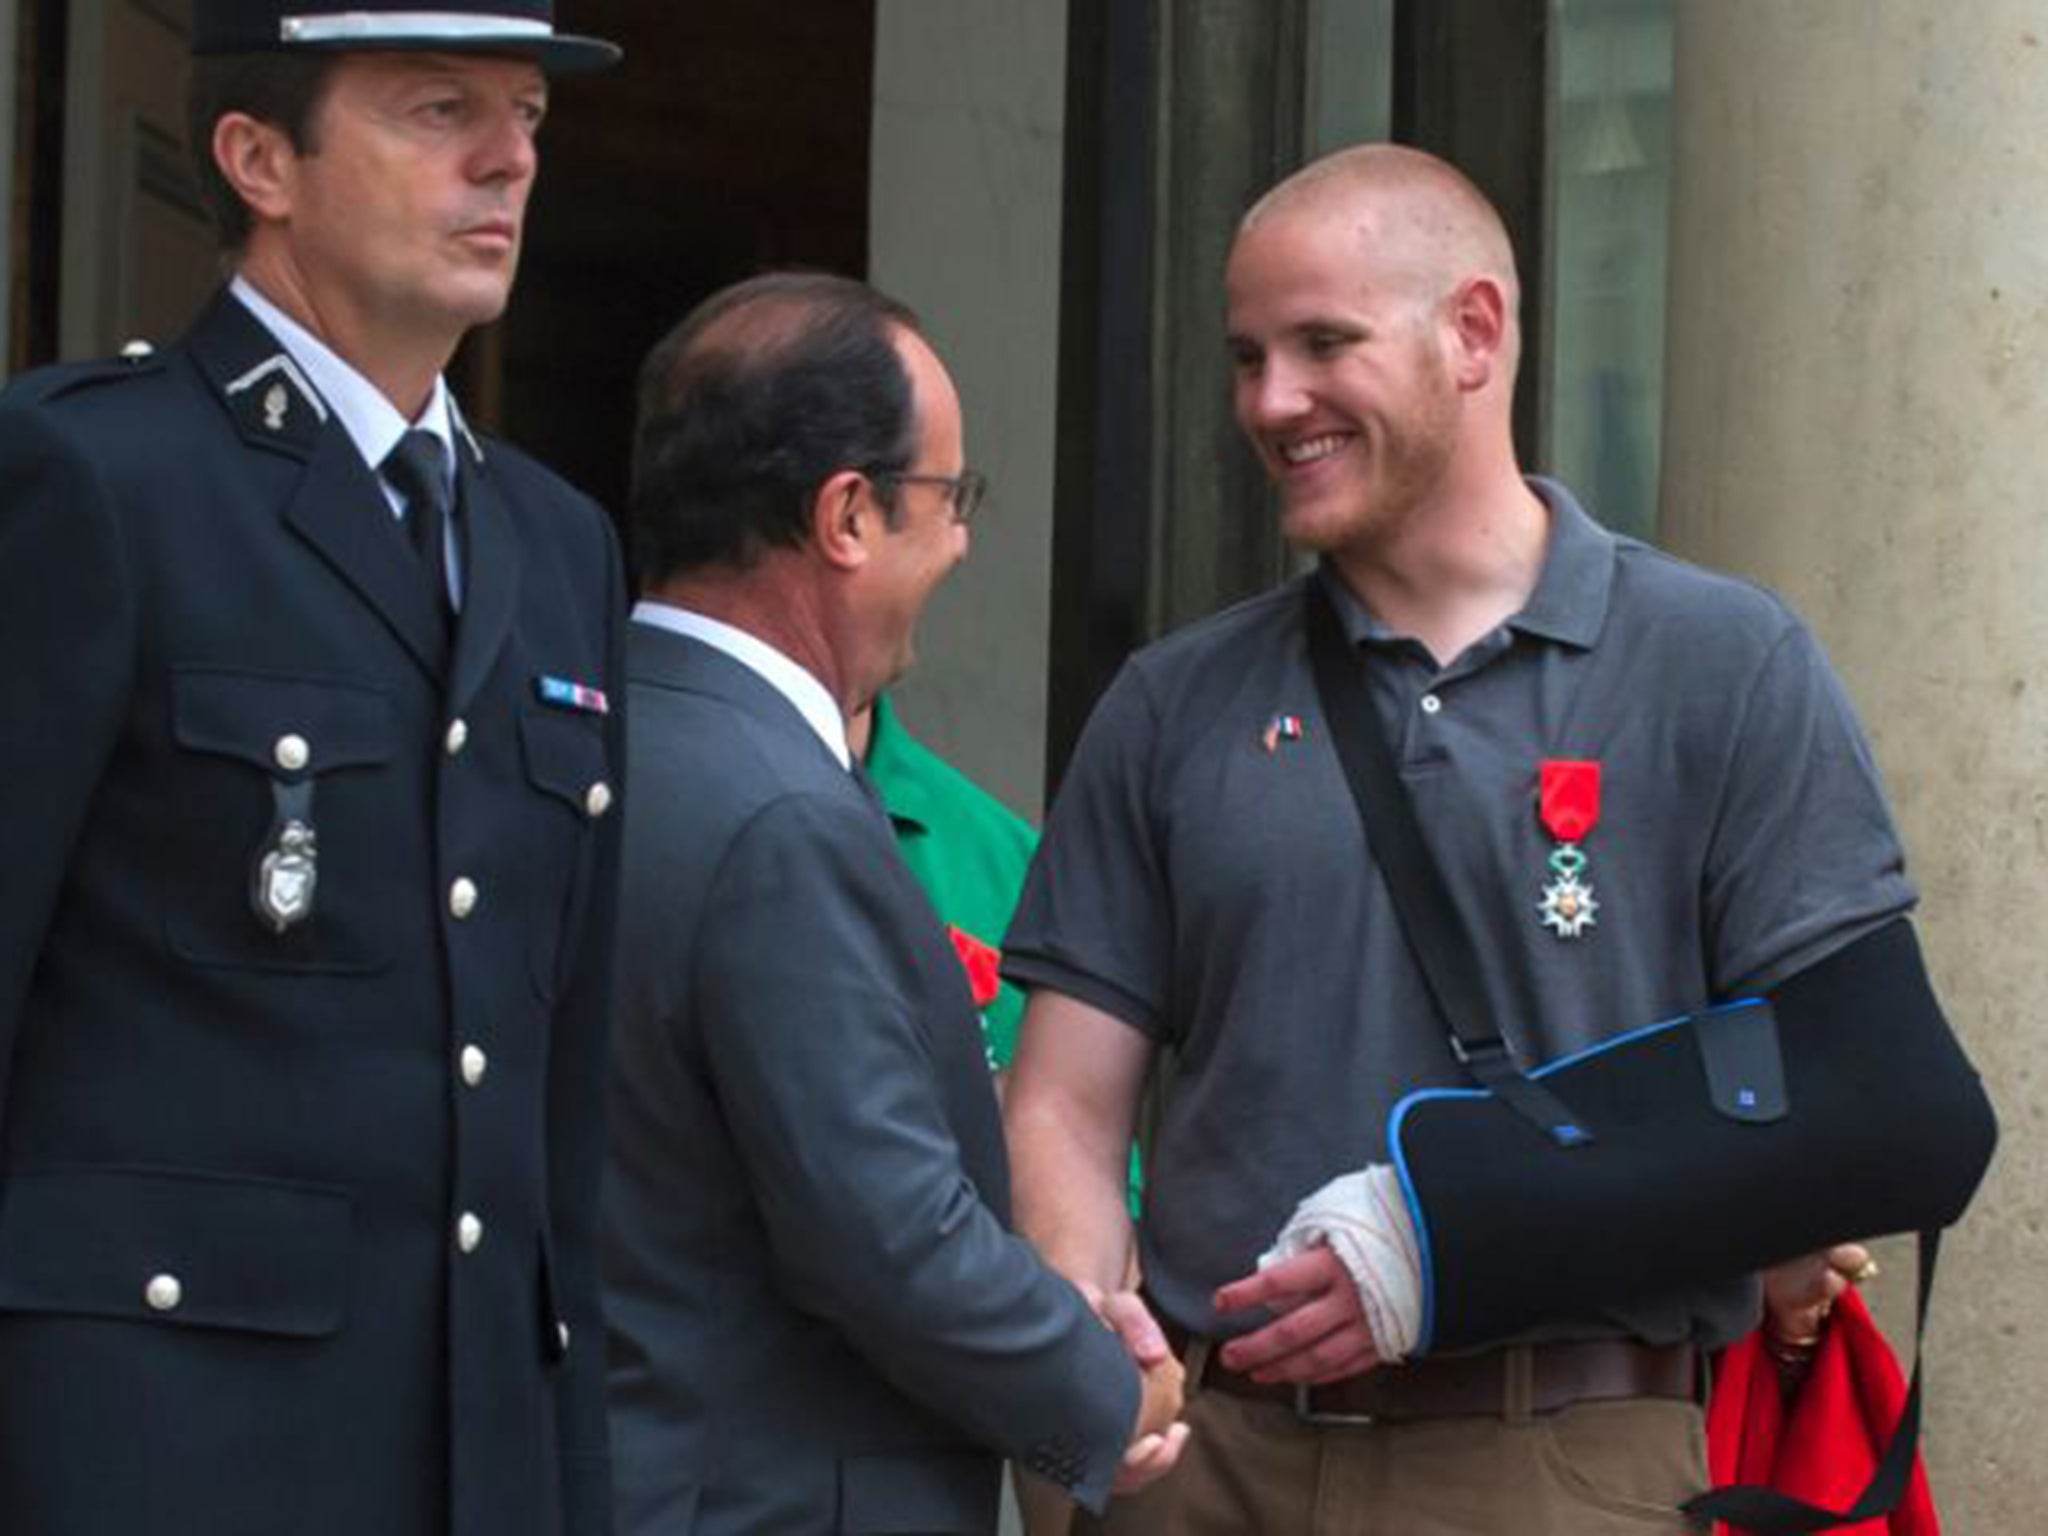 US Airman Spencer Stone shakes hands with French President Francois Hollande outside the Elysee Palace after he was awarded the French Legion of Honor for subduing a gunman on a Paris-bound train in August